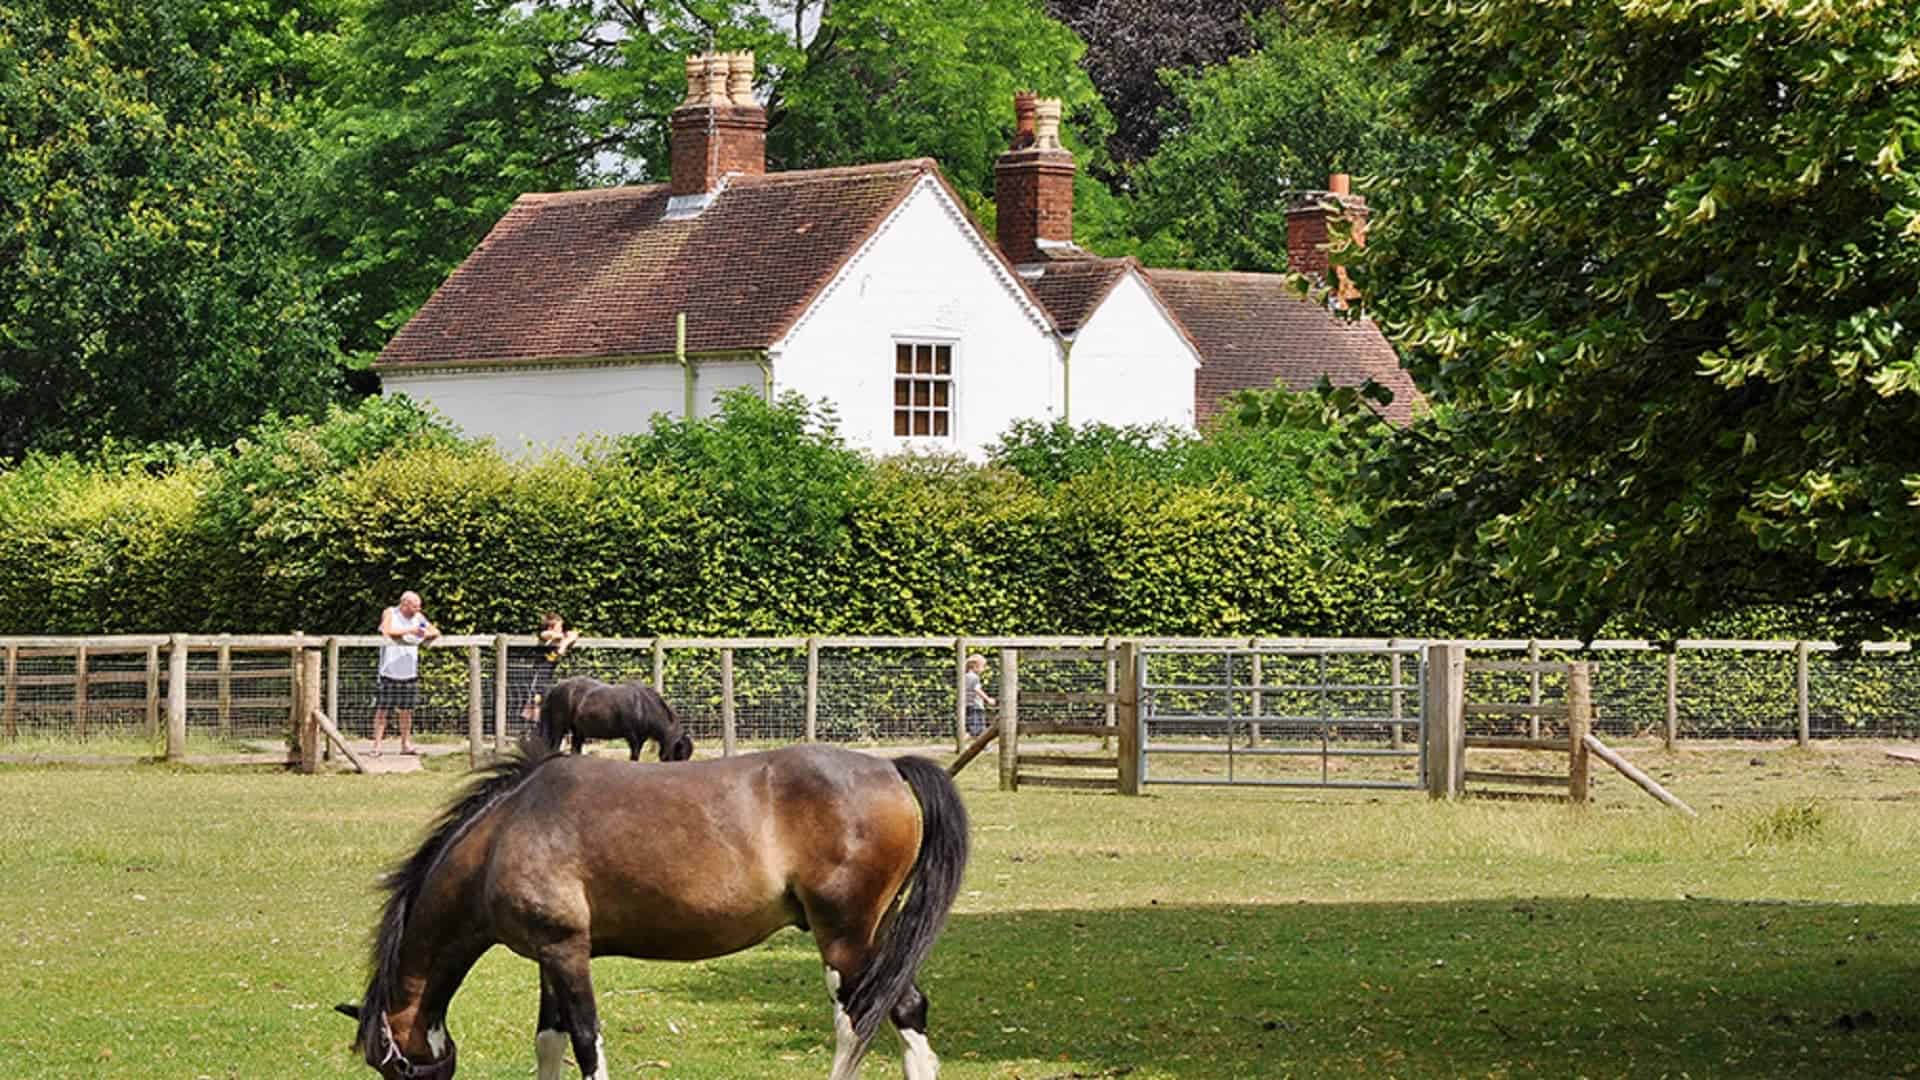 The Old Rectory Farm - Sheldon Country Park in UK